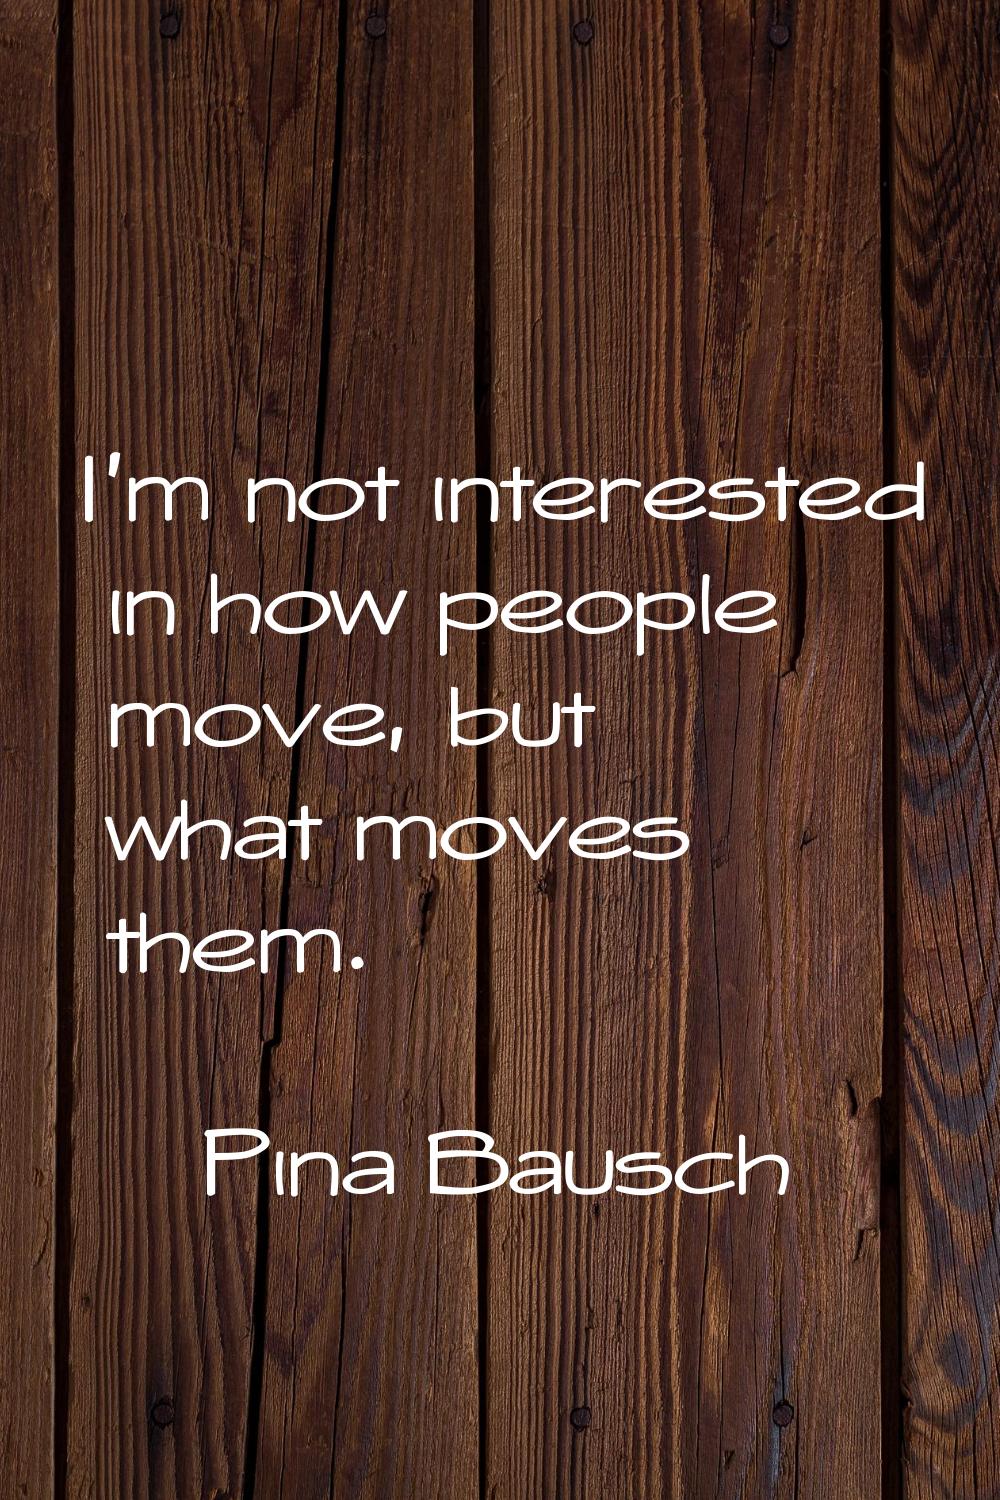 I'm not interested in how people move, but what moves them.